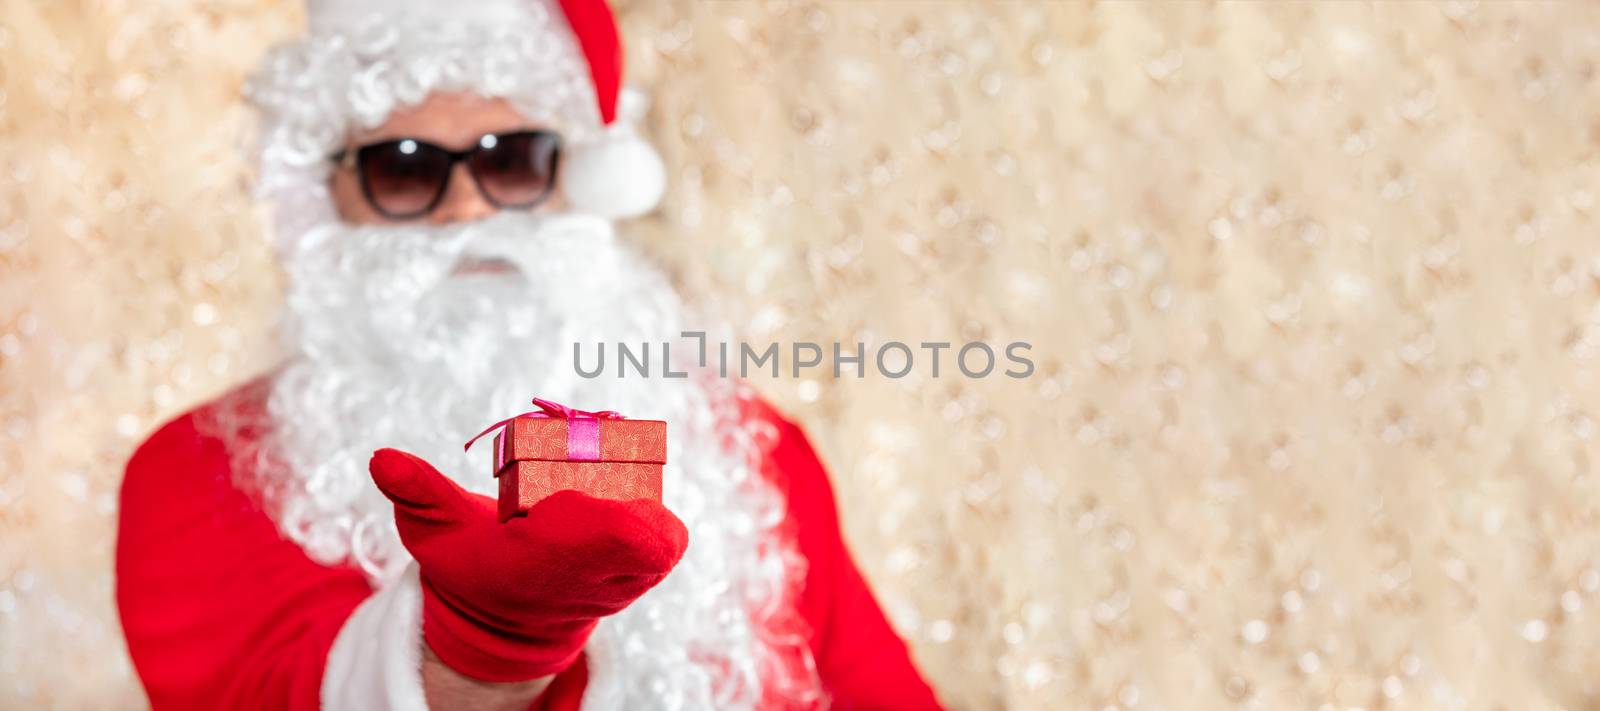 Santa Claus holding a Christmas present, red box with ribbon. Santa wearing sunglasses, with a long white beard, and is out of focus. Golden blurred sparkling background with copy space. Banner size by DamantisZ